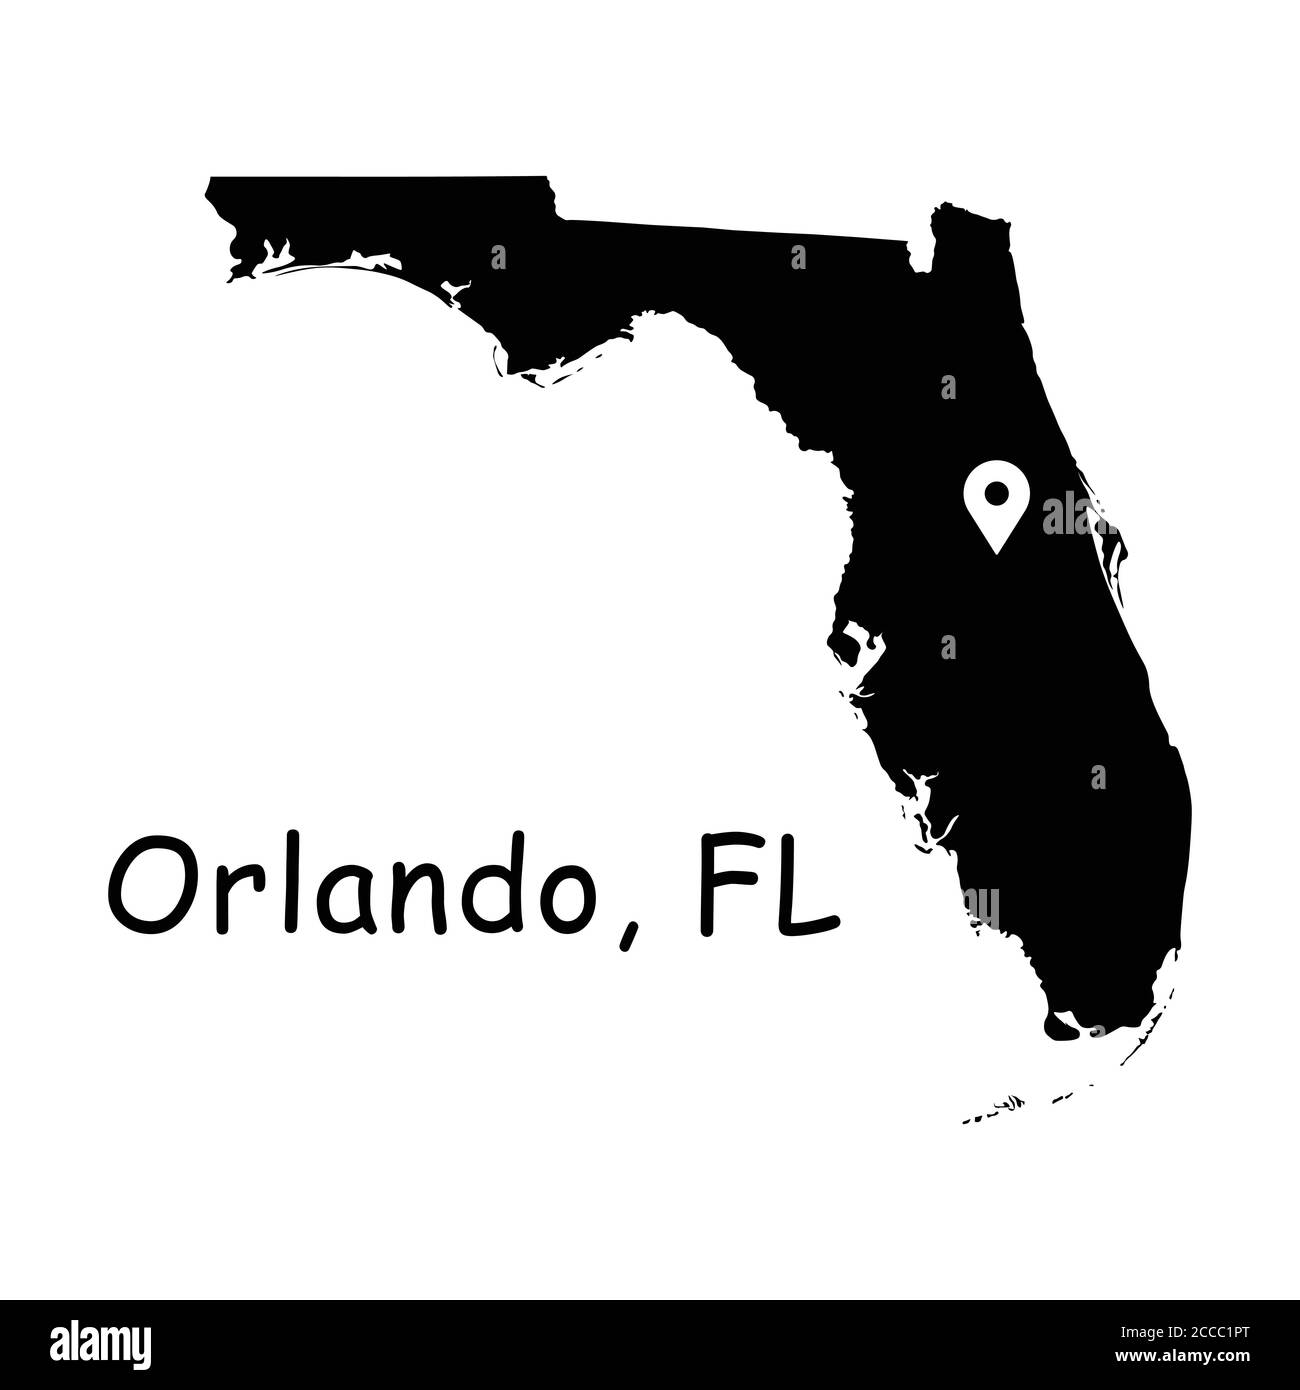 Orlando on Florida State Map. Detailed FL State Map with Location Pin on Orlando City. Black silhouette vector map isolated on white background. Stock Vector